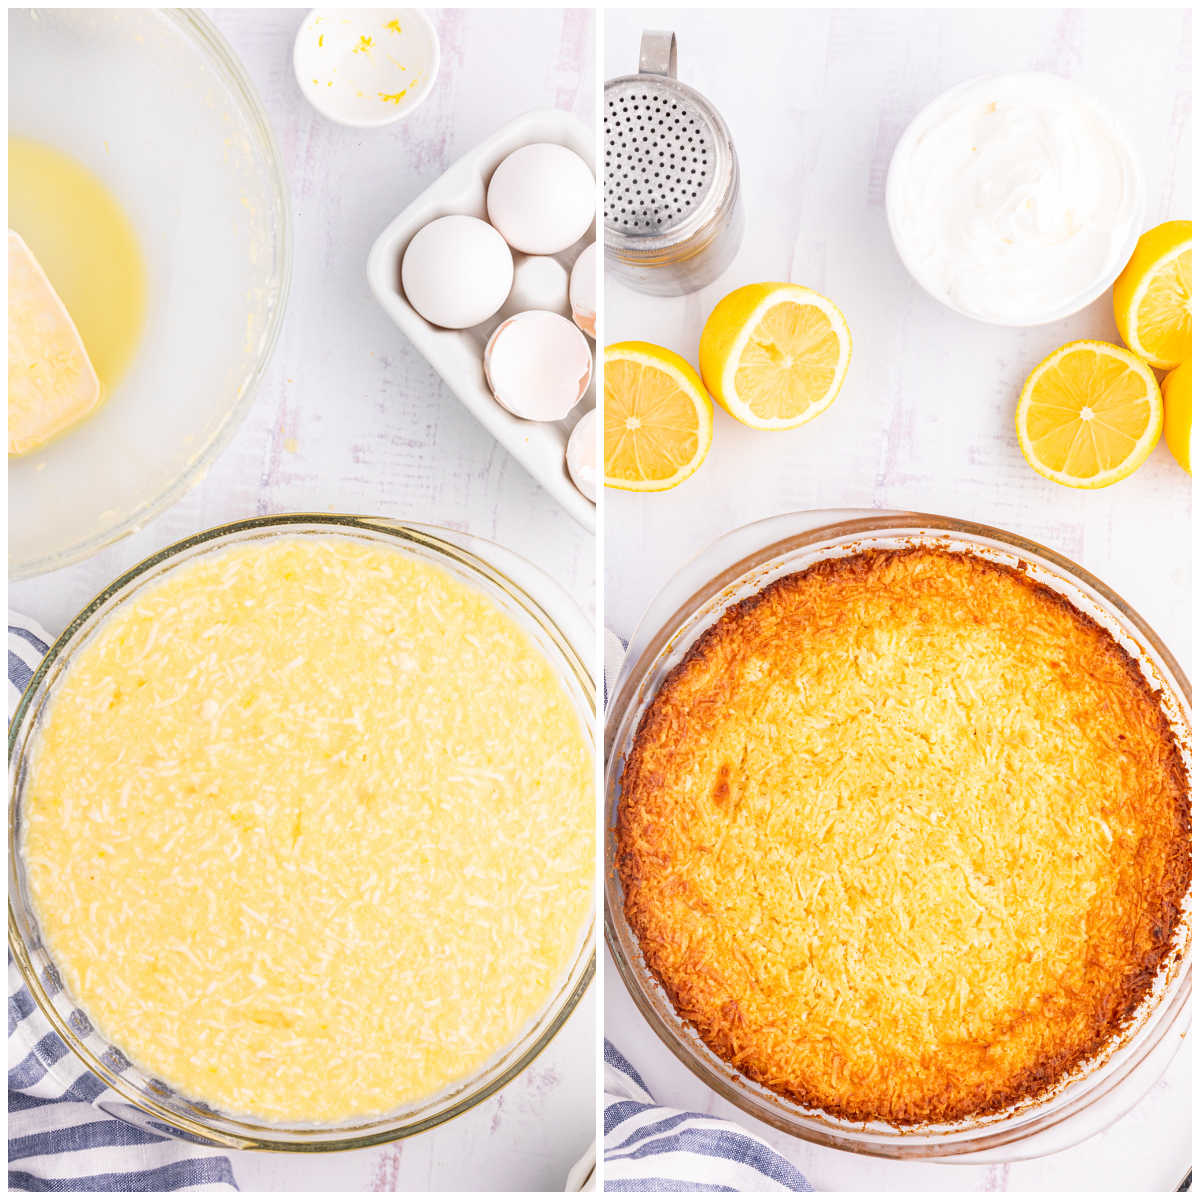 Steps to make Lemon Impossible Pie.